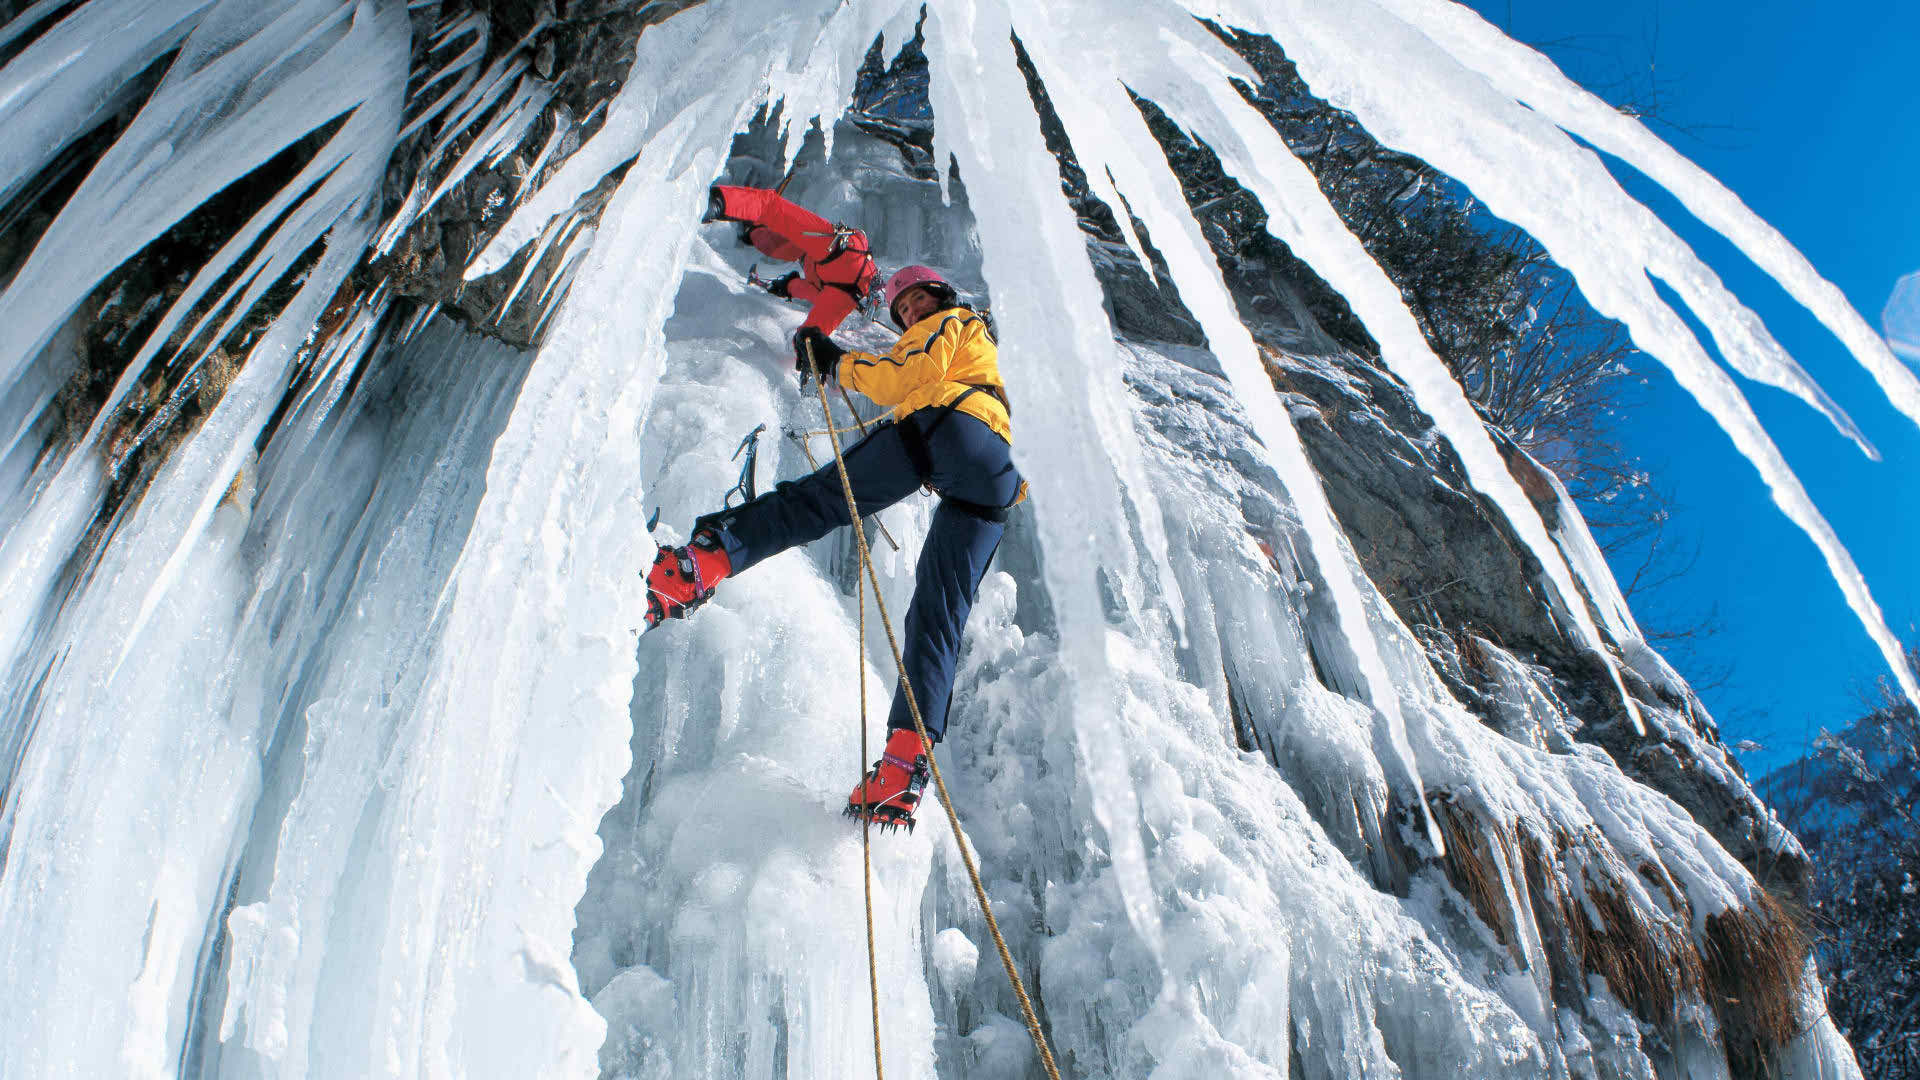 Ice Climbing: Thousands Of Ice Chandeliers, Extreme Sports And Dangerous Hobby In North America. 1920x1080 Full HD Background.